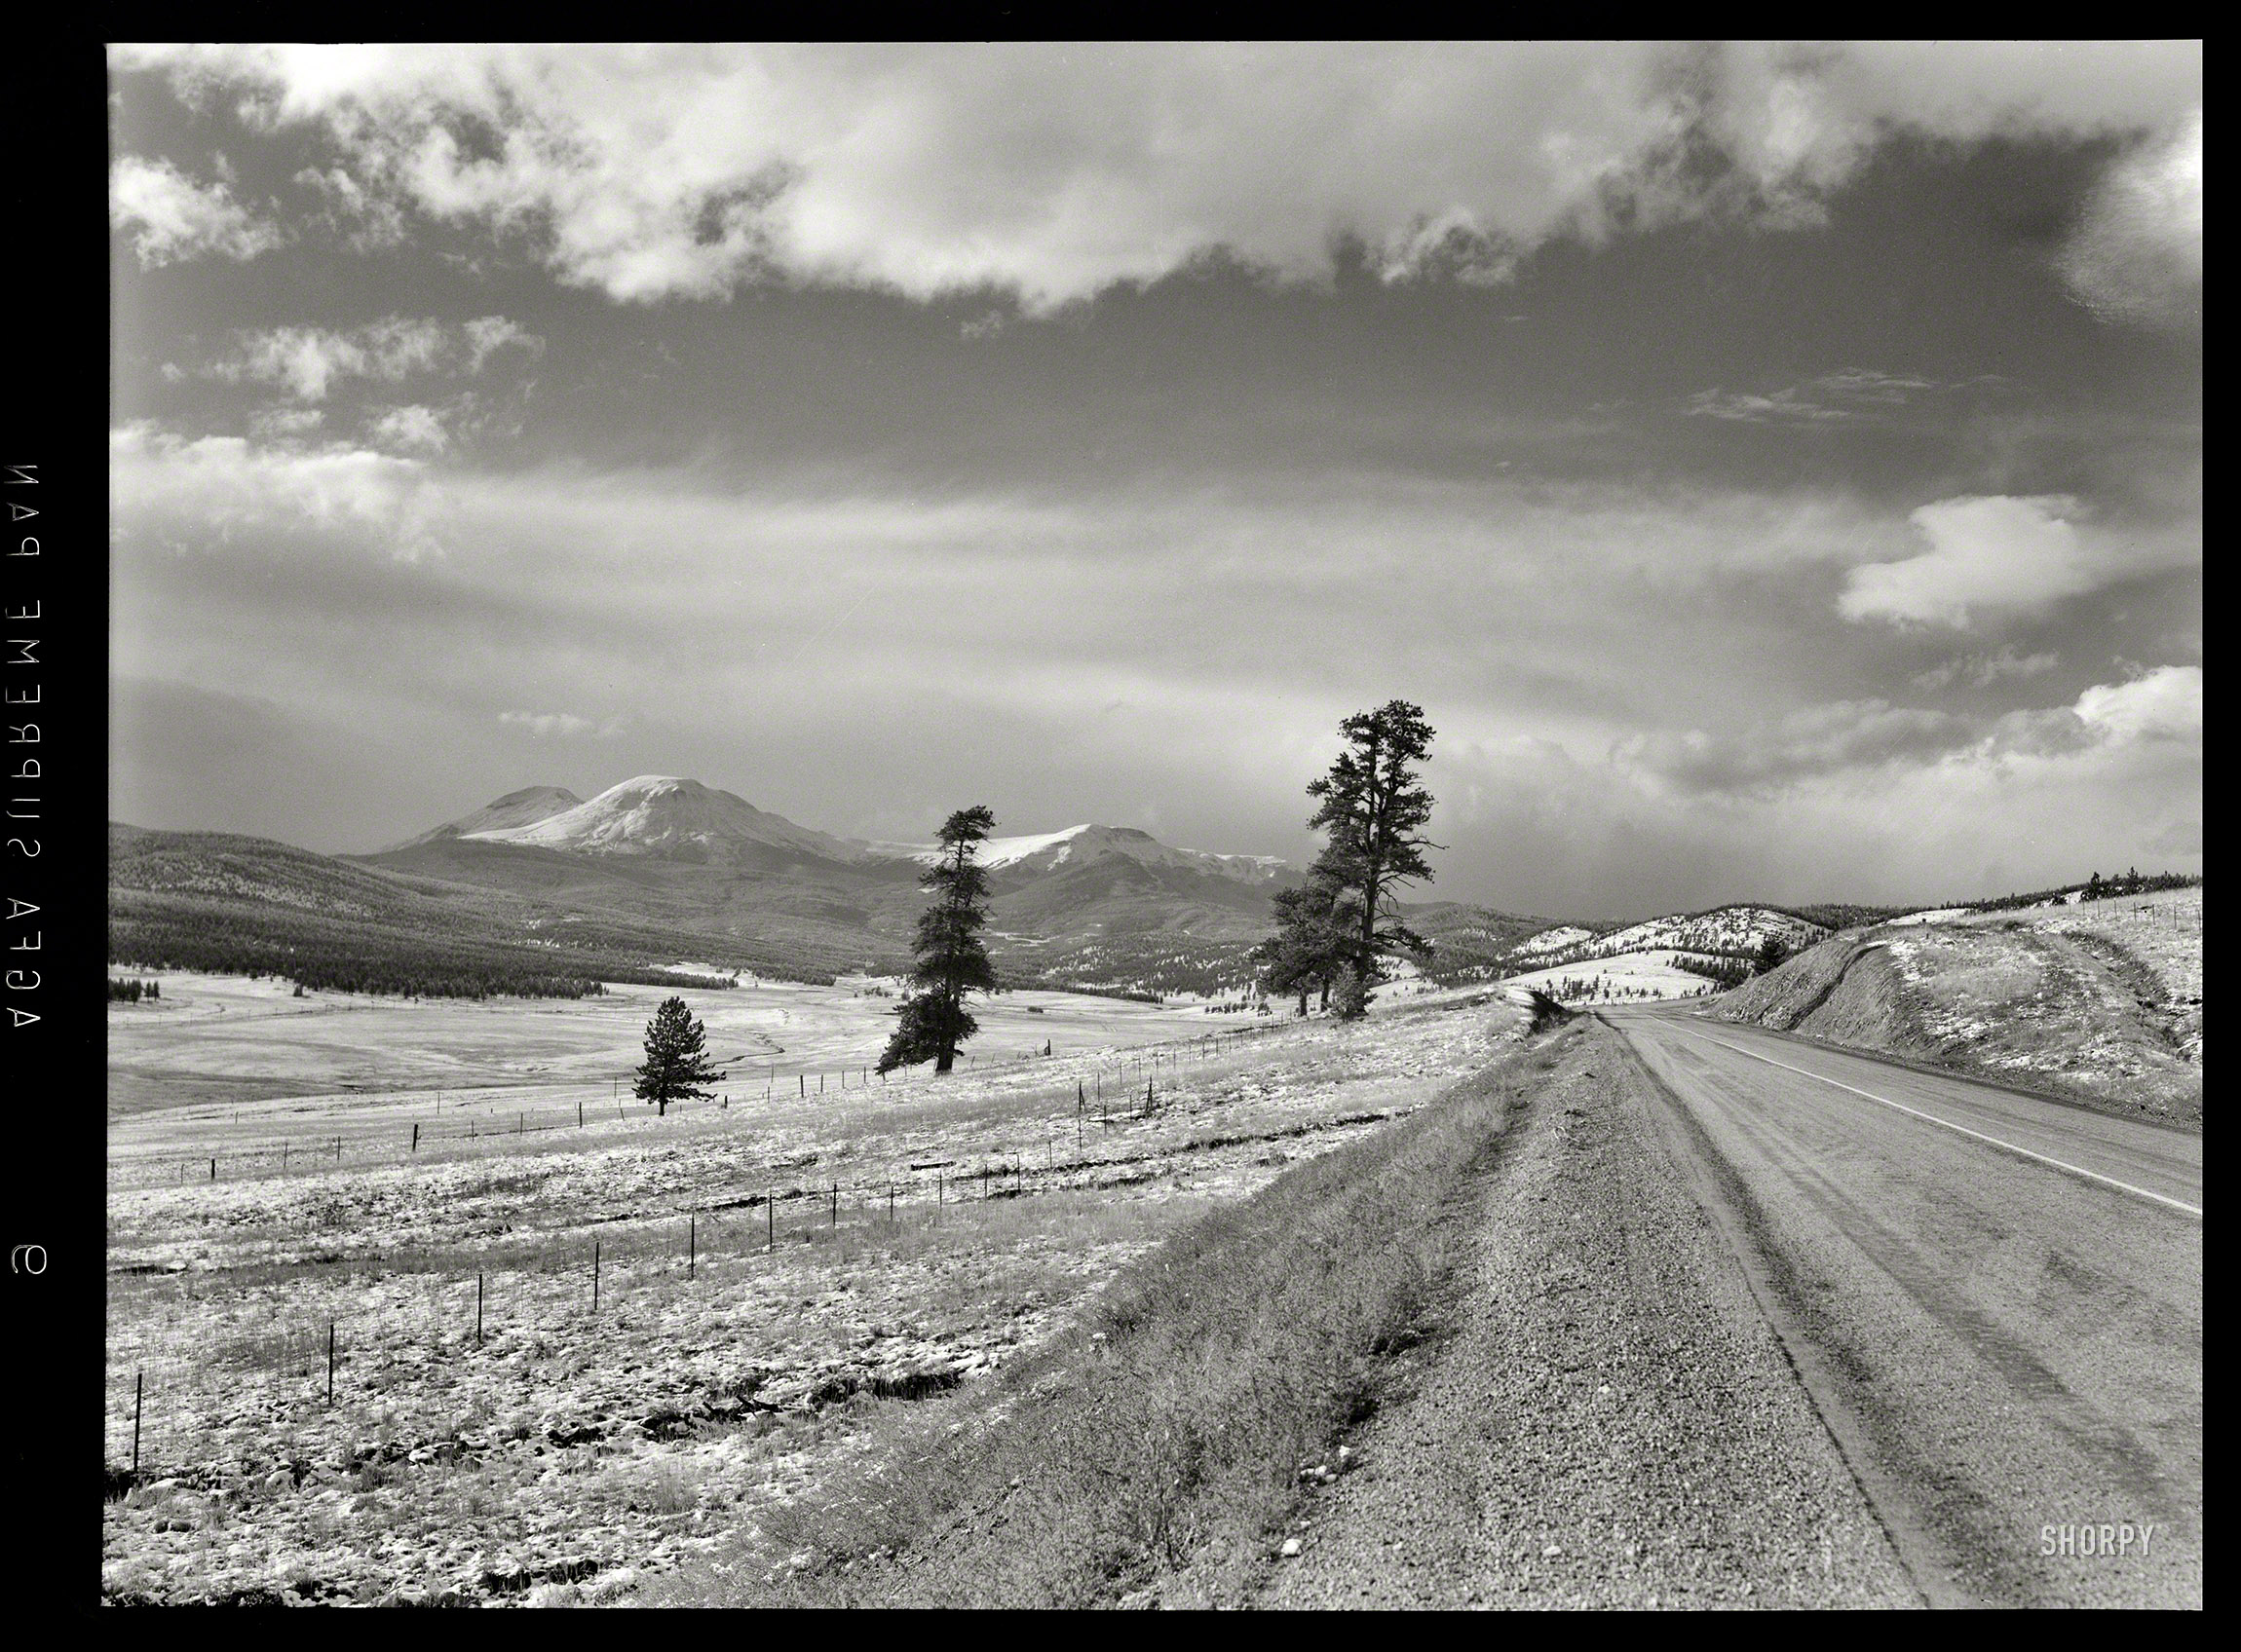 September 1941. "Highway southwest of Denver, Colorado." Photo by Marion Post Wolcott for the Farm Security Administration. View full size.